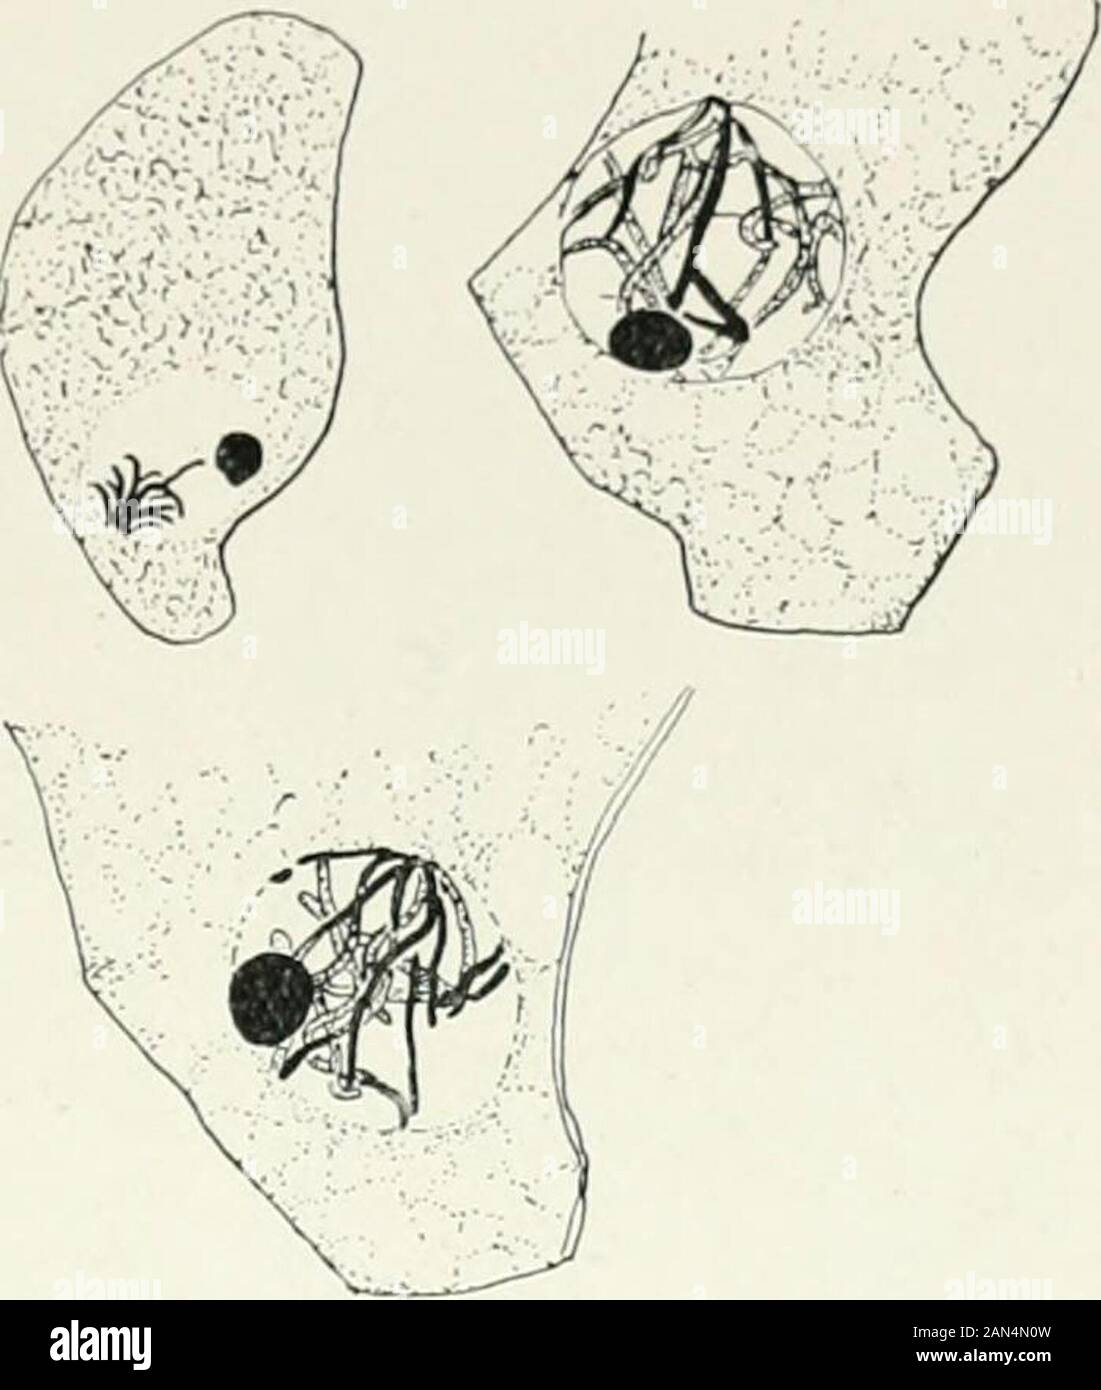 Fungi, Ascomycetes, Ustilaginales, Uredinales . J ASCOMYCETES 45 was proposed. The occurrence of ;i brachymeiotic reduction has since beenobserved in several other fungi, and has also been in several cases denied. Chromosome Association. There are a number of fungi, of whichPhyllactinia Corylea is perhaps the most fully studied, in which no change inthe chromosome number takes placethroughout the life-history. In Phyl-lactinia, Harper showed in 1905 thatthe chromosomes remain visible instrands attached to the central bodythroughout the resting stages. Ineach of the nuclei of the developingascu Stock Photo